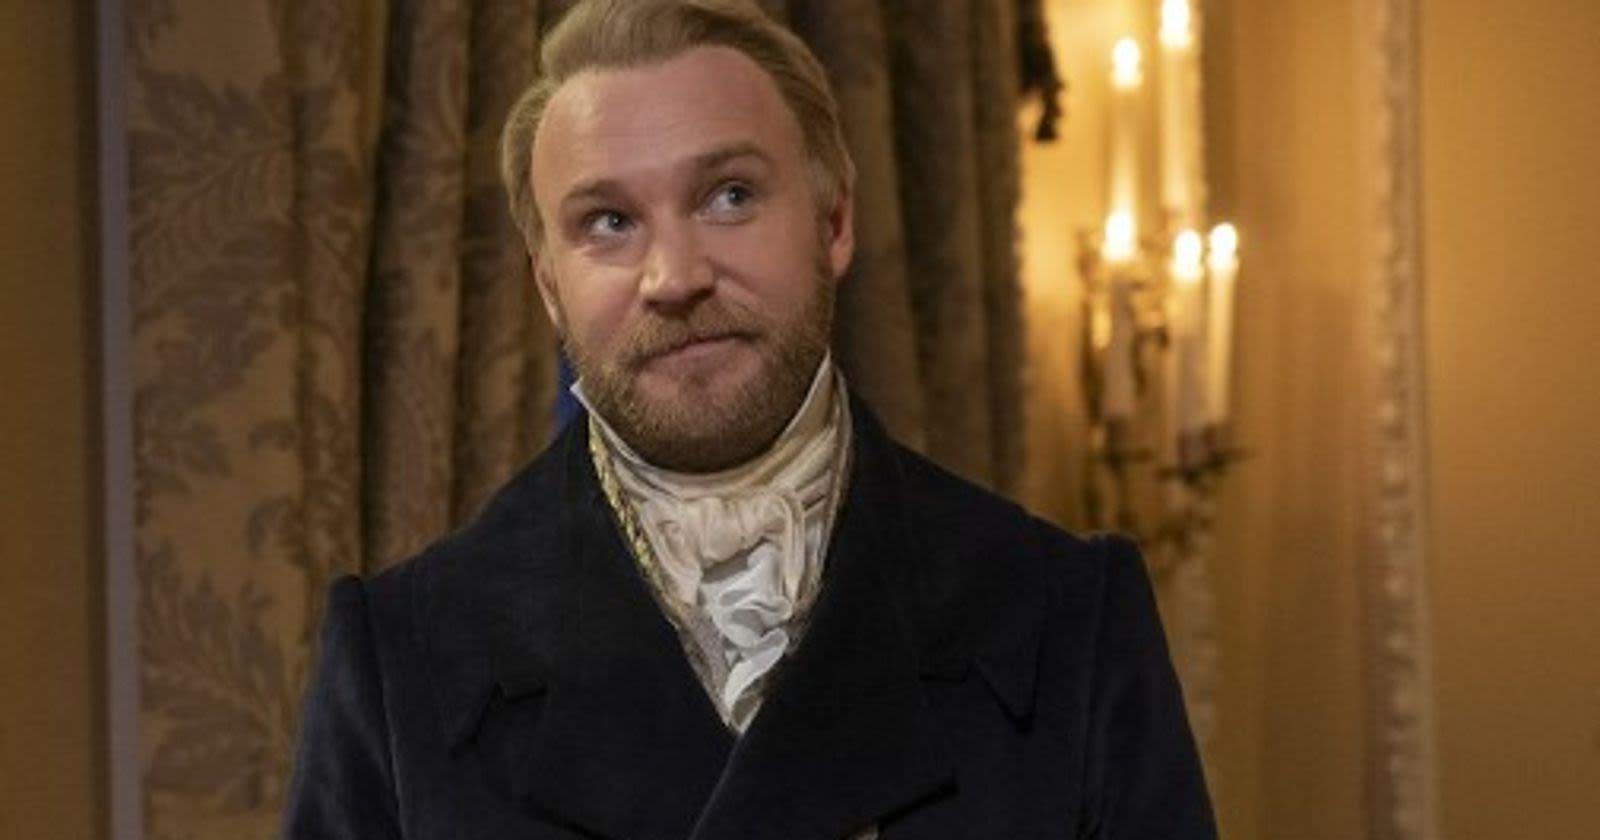 Bridgerton Fans Disappointed This 'Eccentric' New Character Isn't A Giant Creep